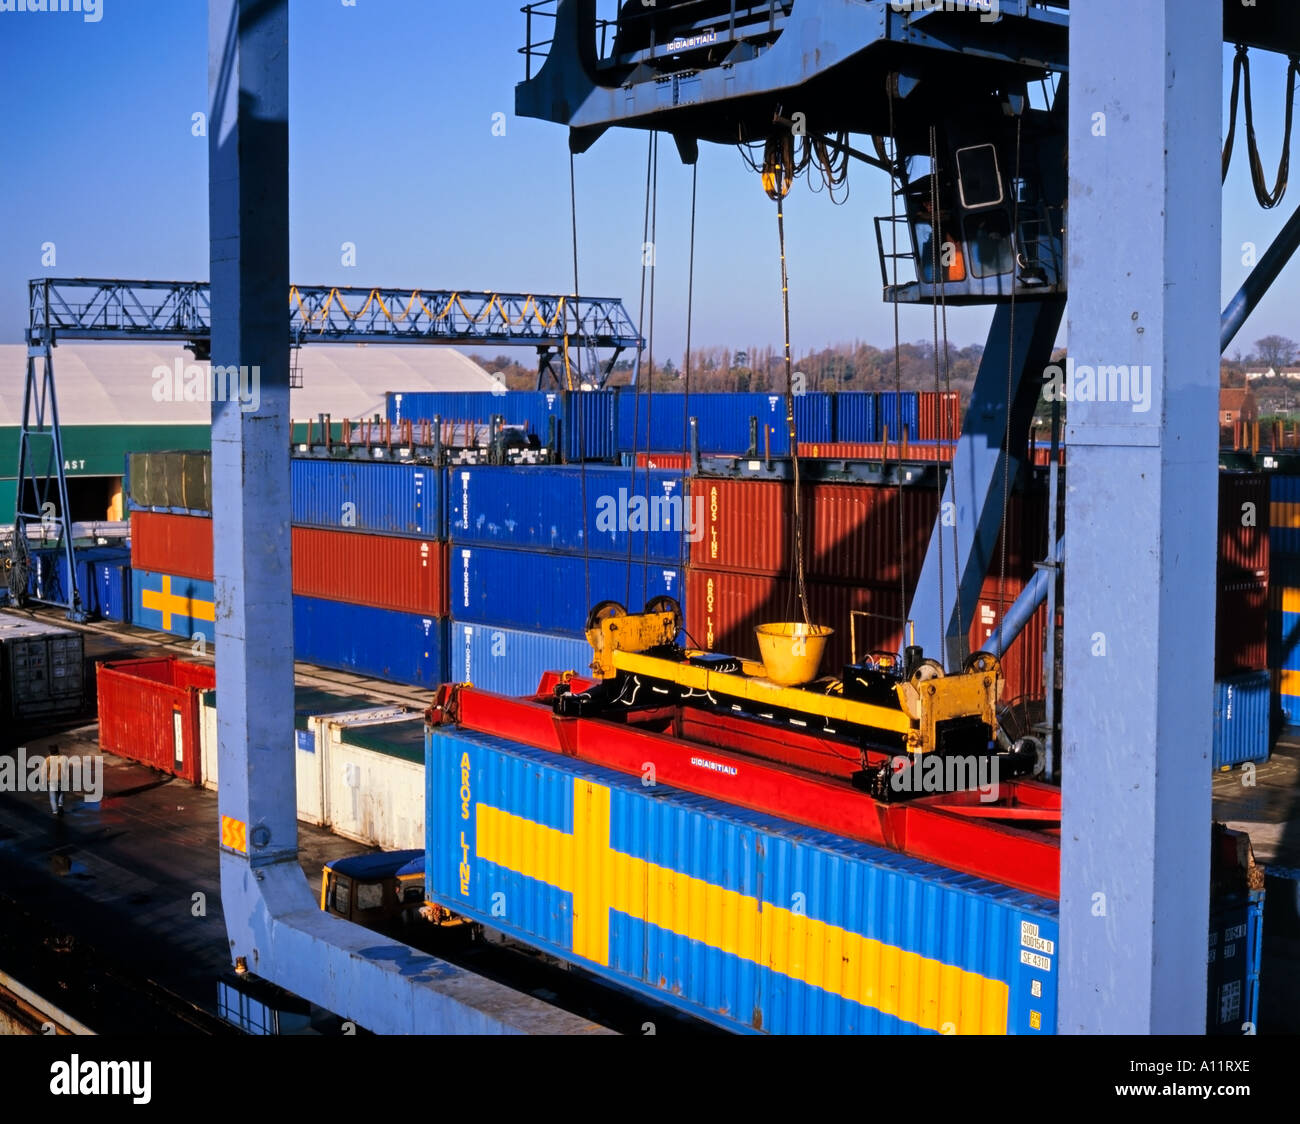 Swedish containers stacked at a container terminal and docks, Sweden imports and exports. Stock Photo